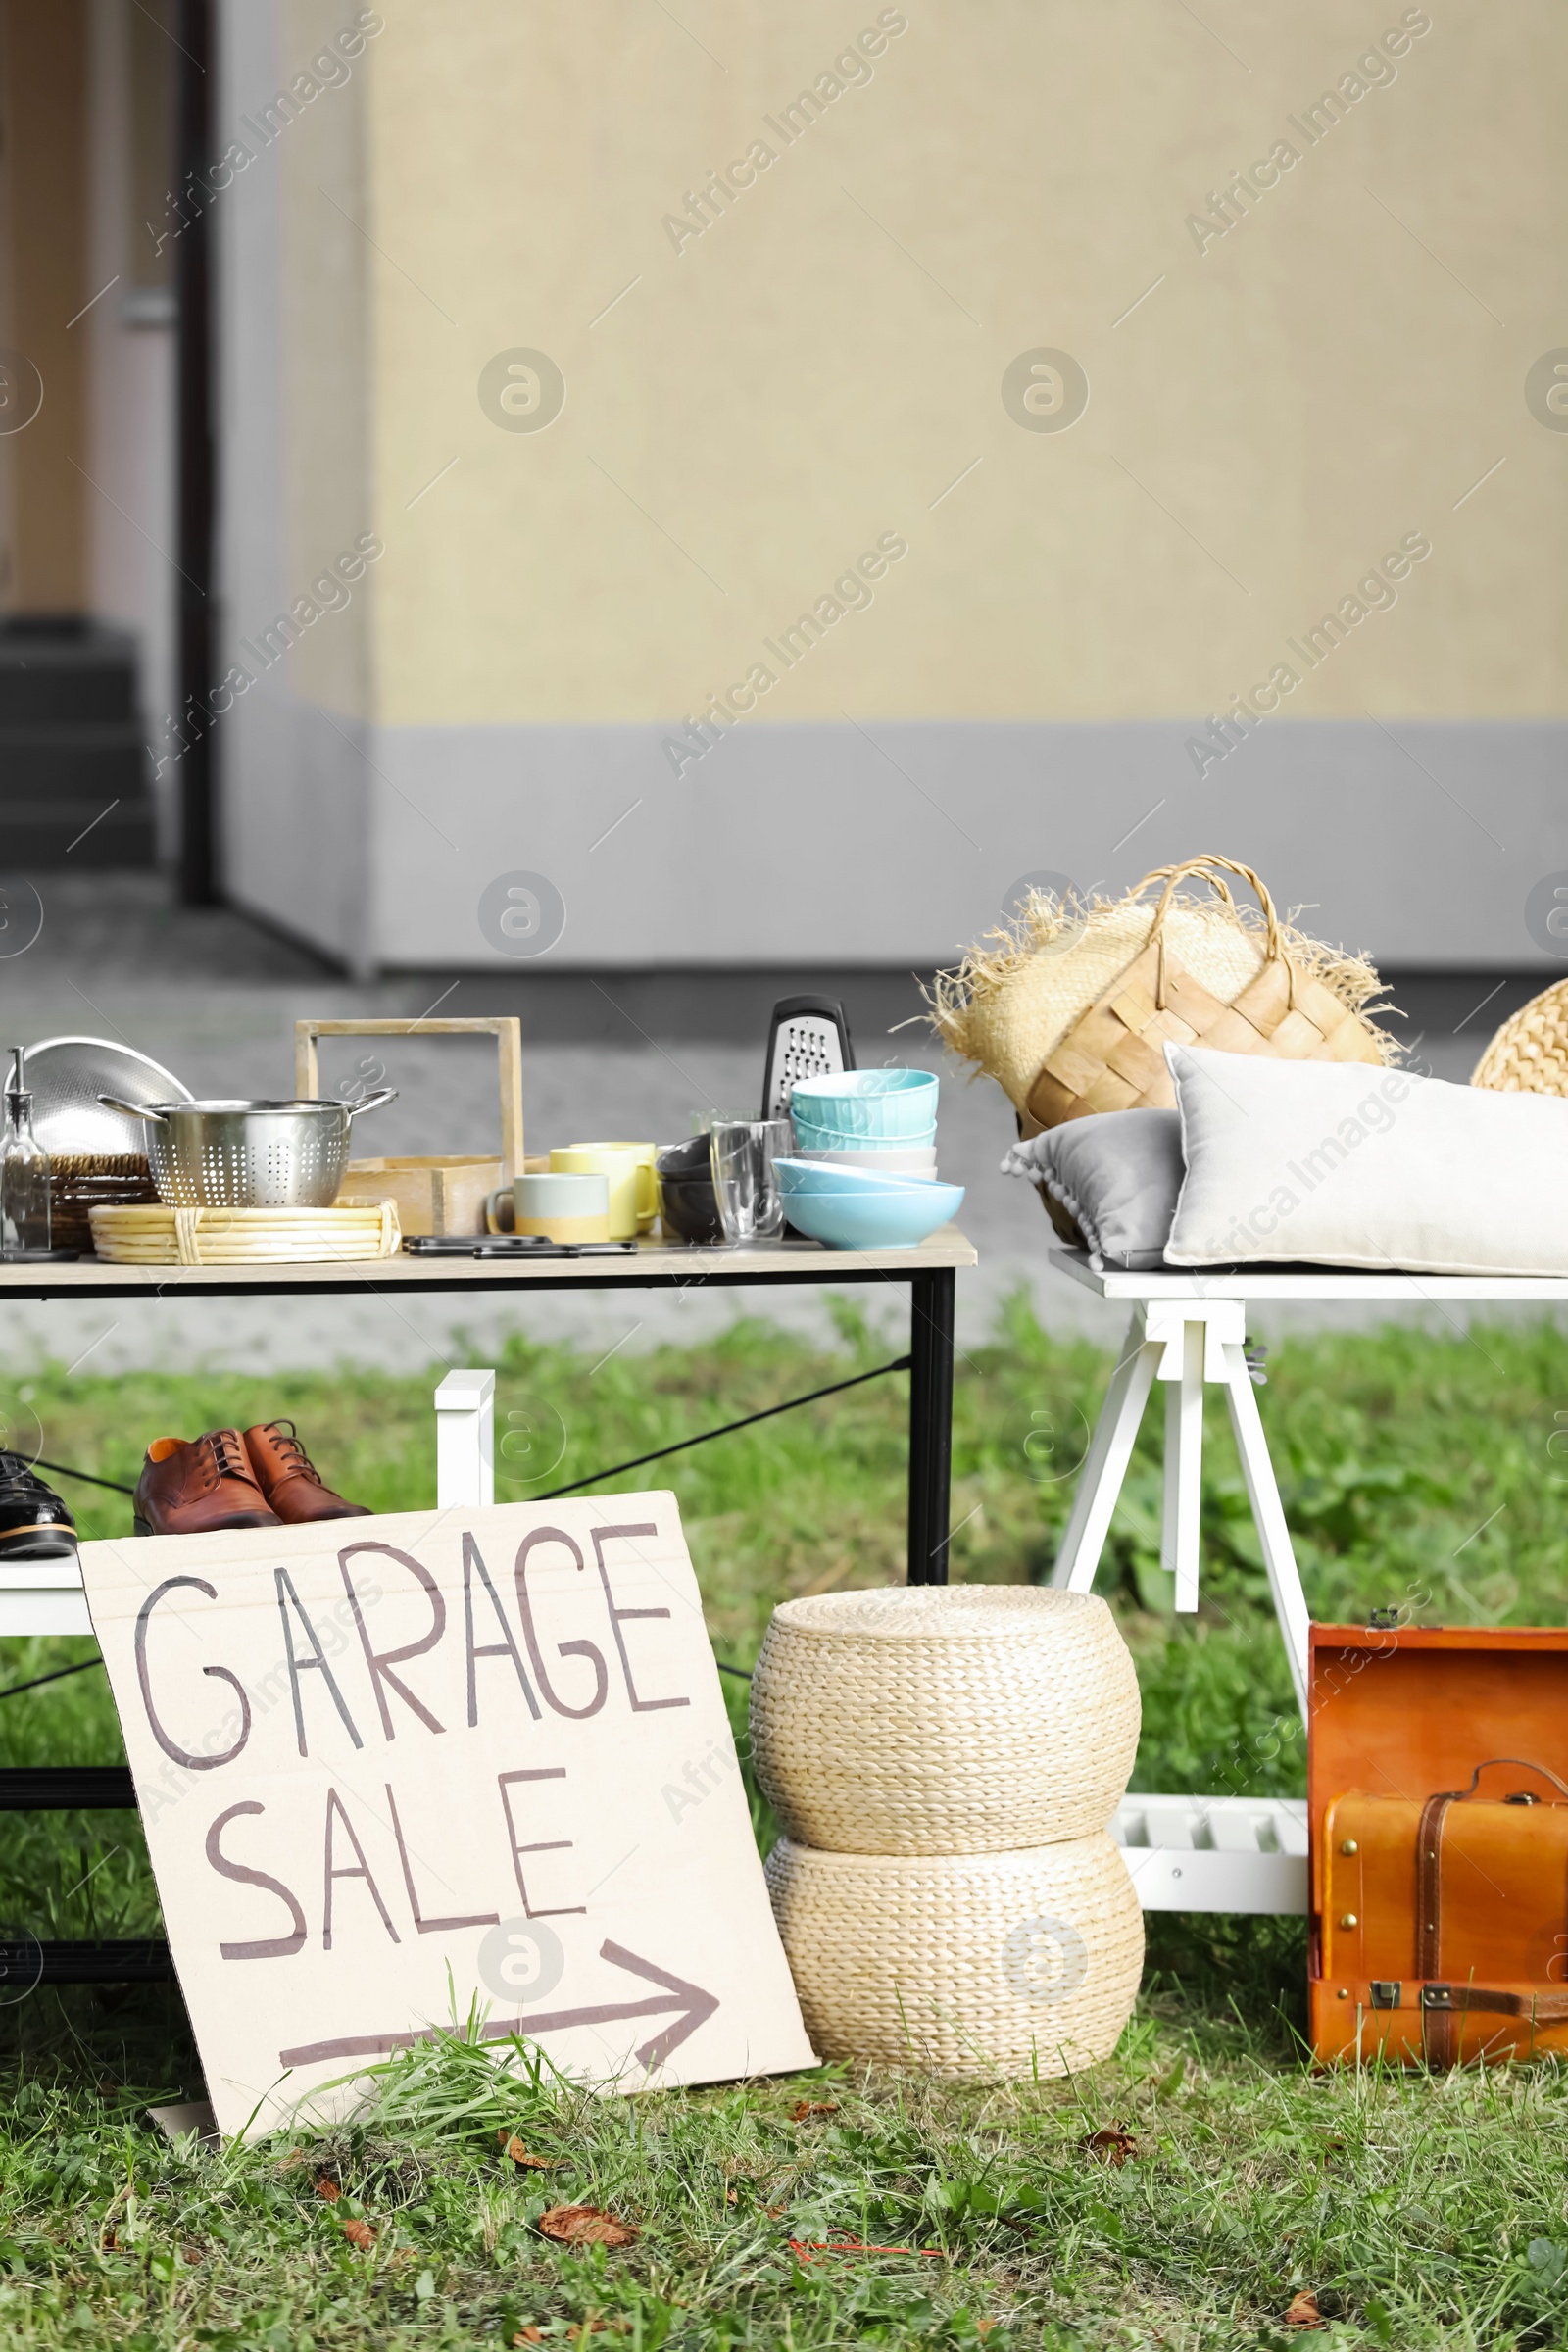 Photo of Sign Garage sale written on cardboard near tables with different stuff in yard